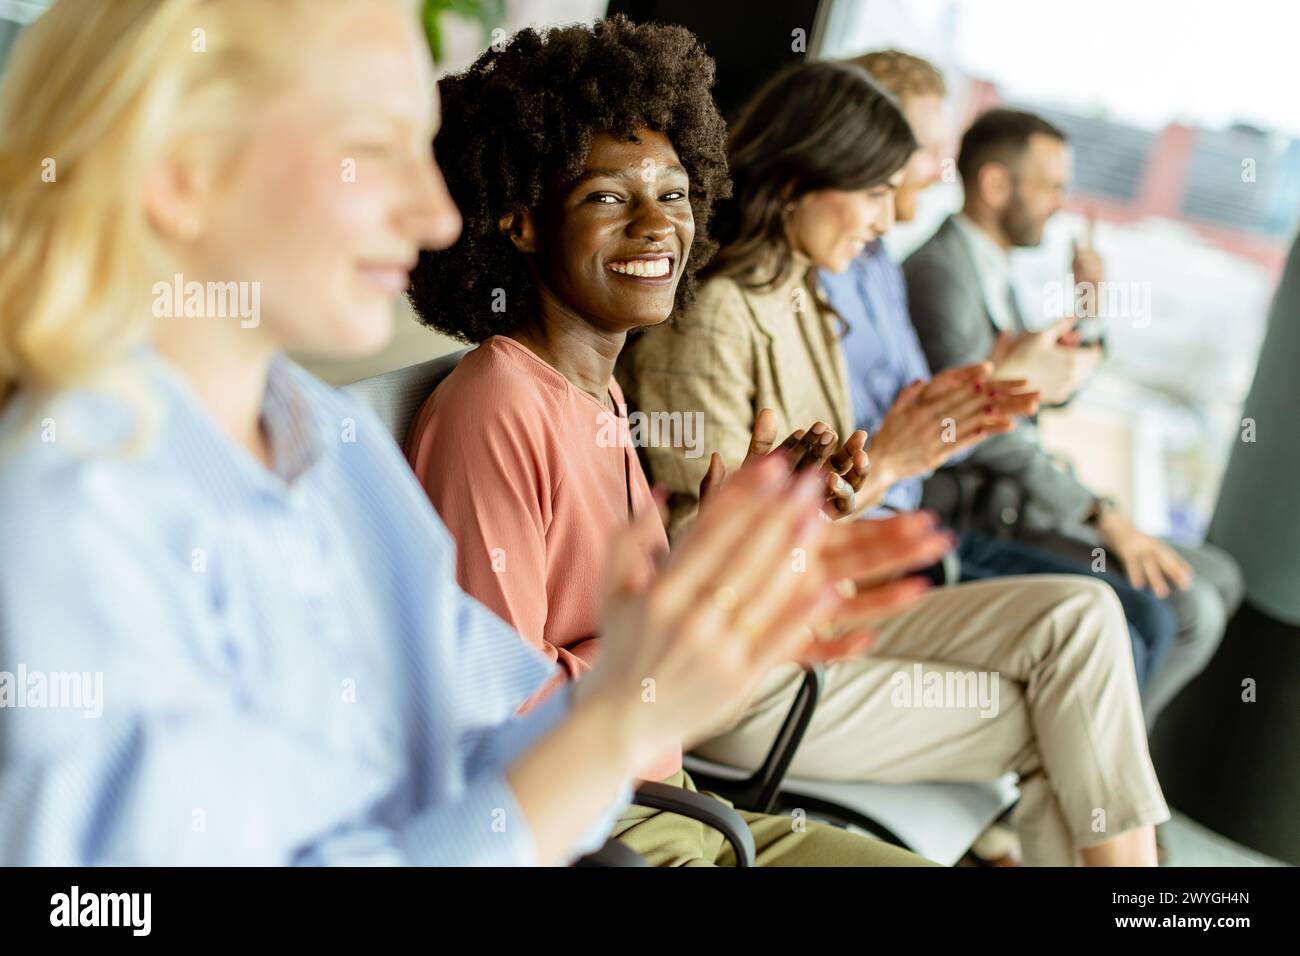 Smiling woman leads a round of applause with peers, sharing a moment of joy Stock Photo